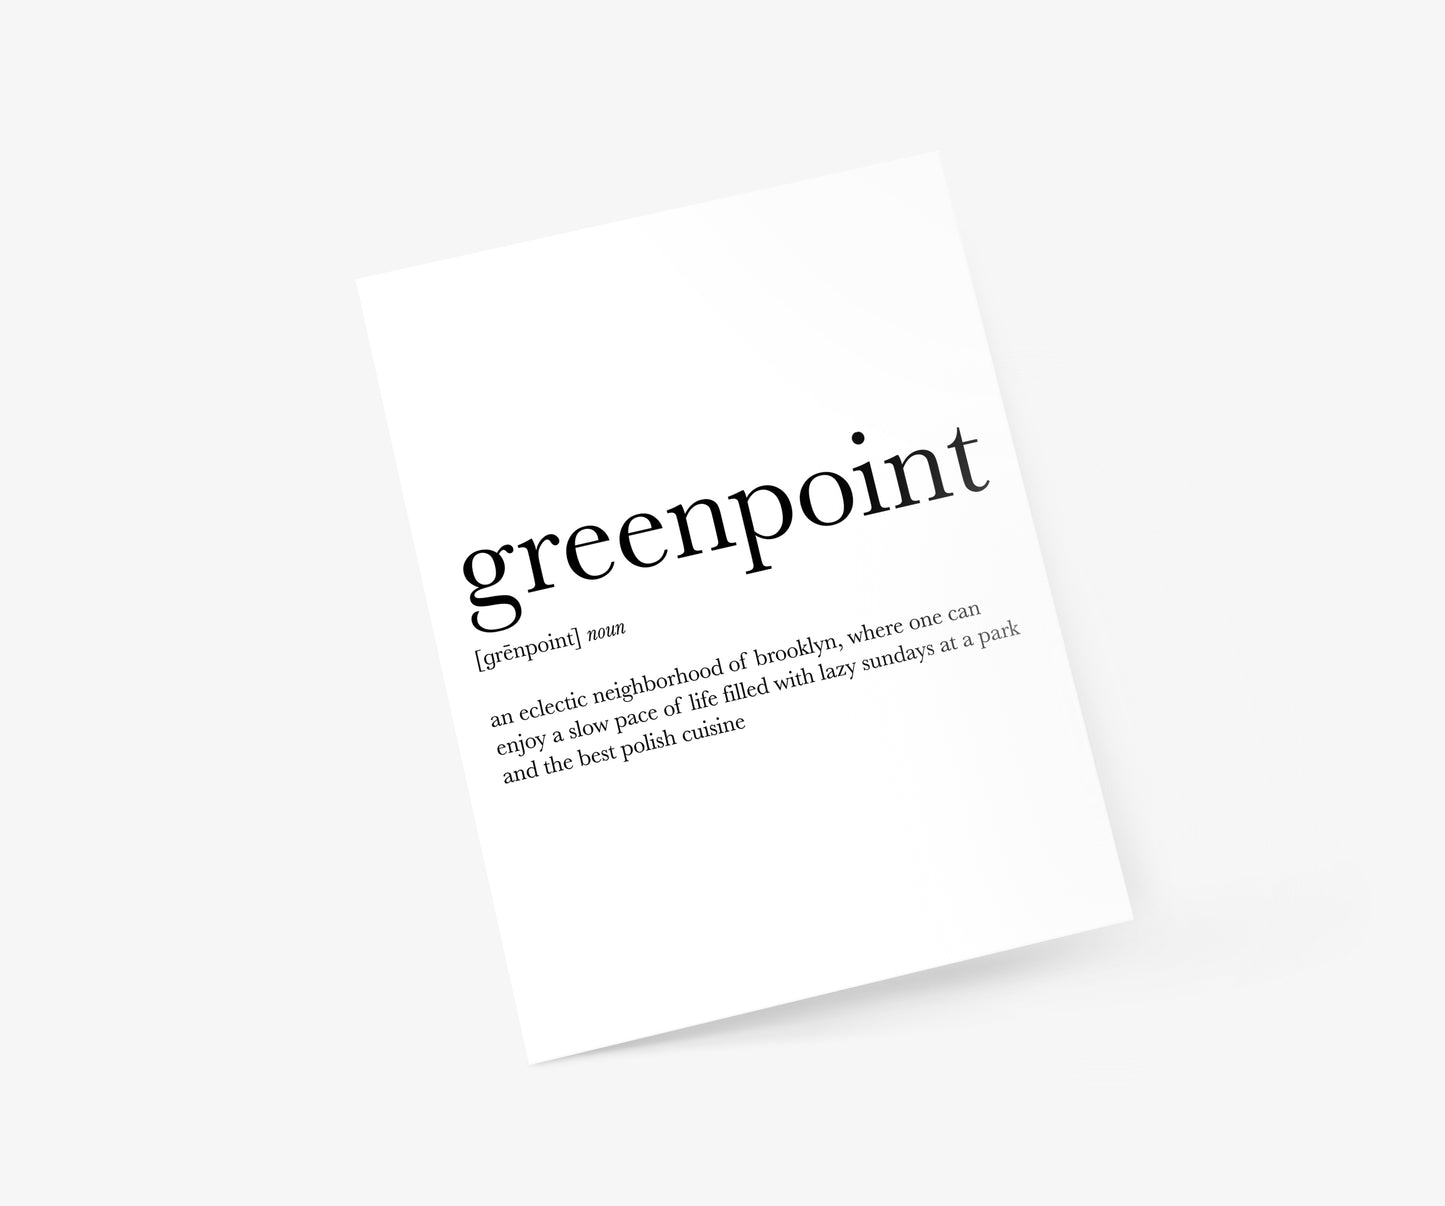 Greenpoint Definition - New York City